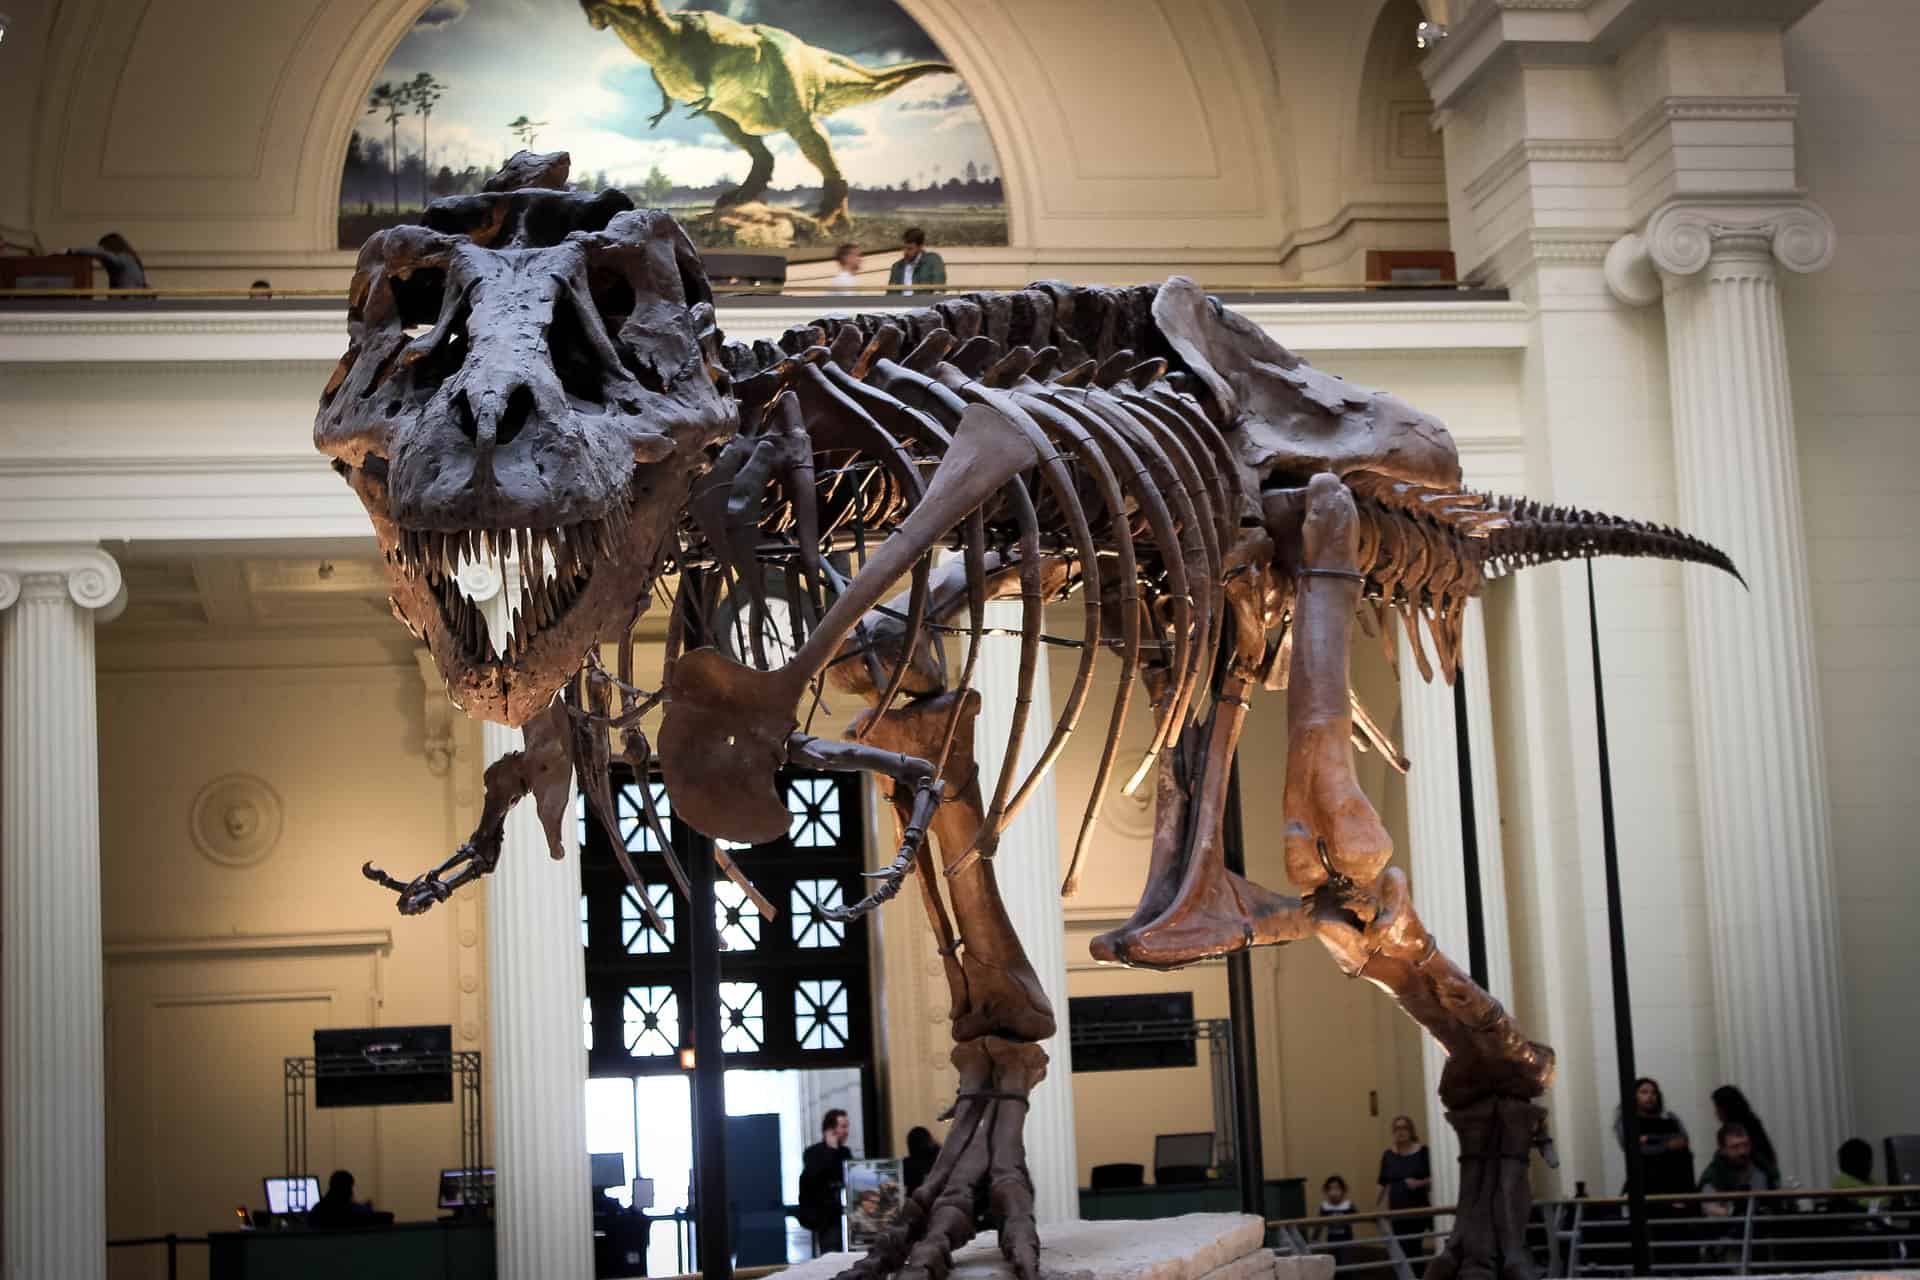 Best things to do in Chicago Illinois - Michael Sparrow - Dinosaur exhibit at the Field Museum by Katie Rose on Pixabay